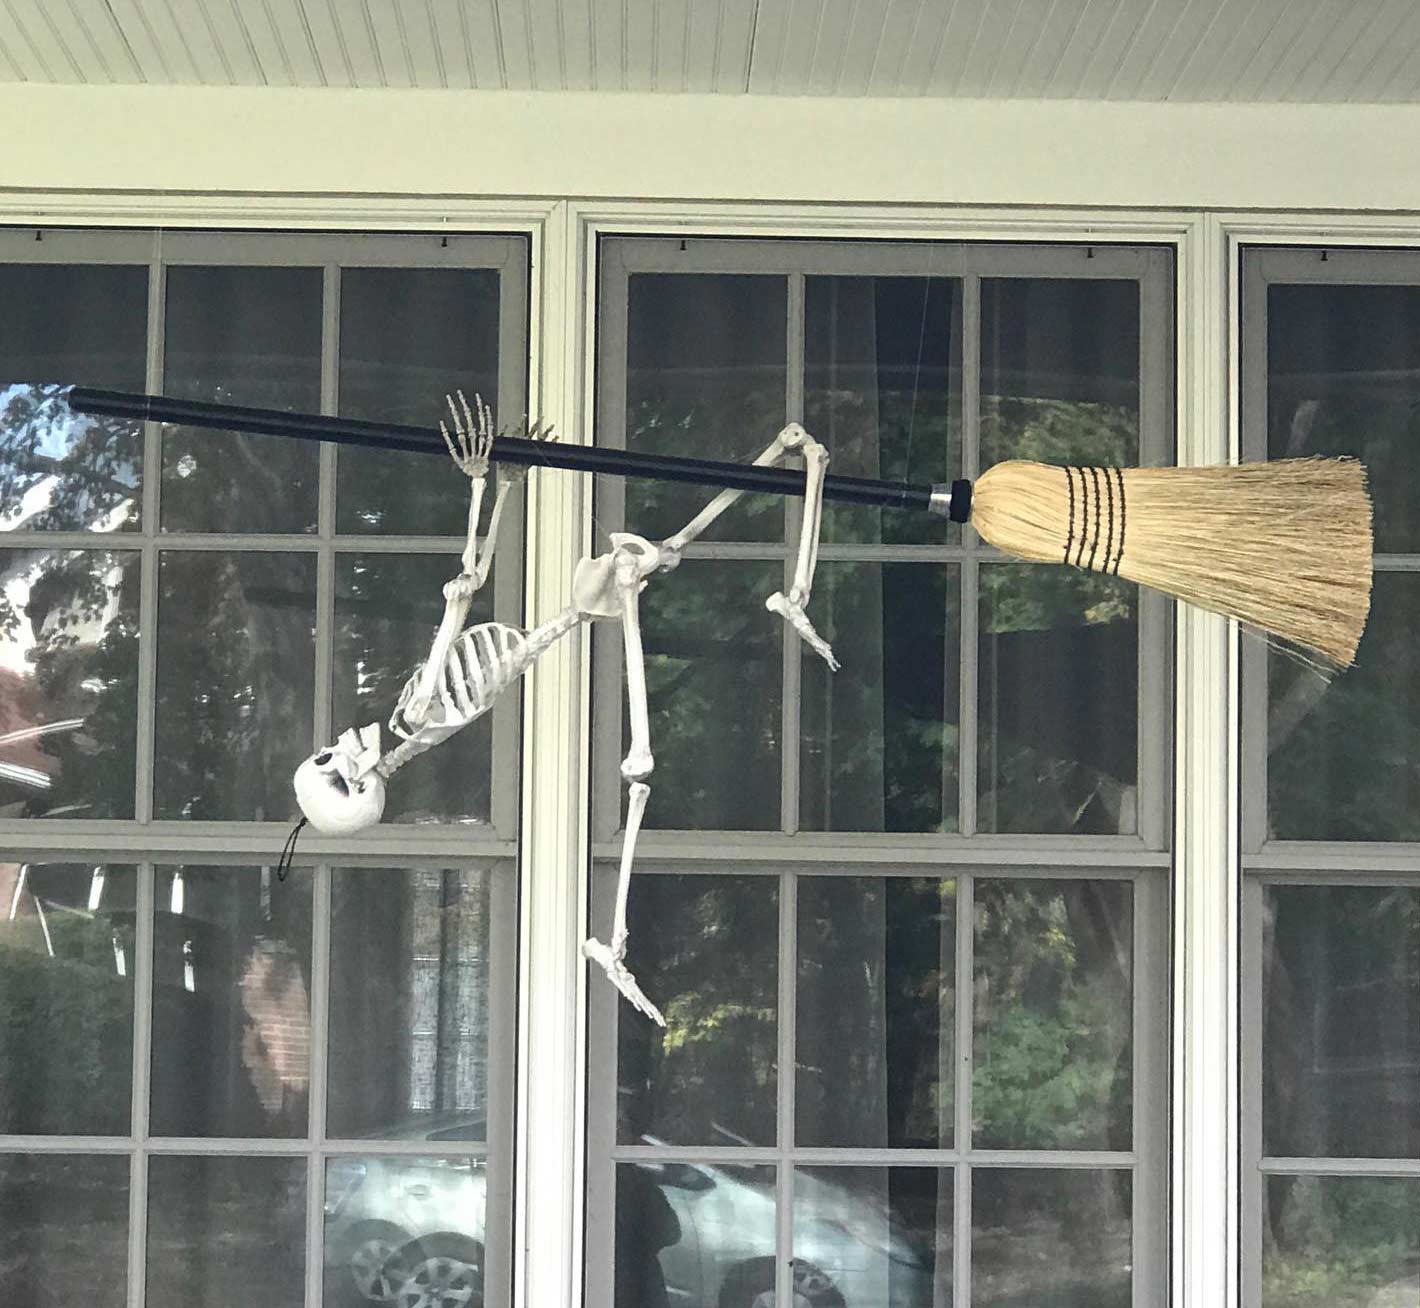 A hanging broom with a skeleton